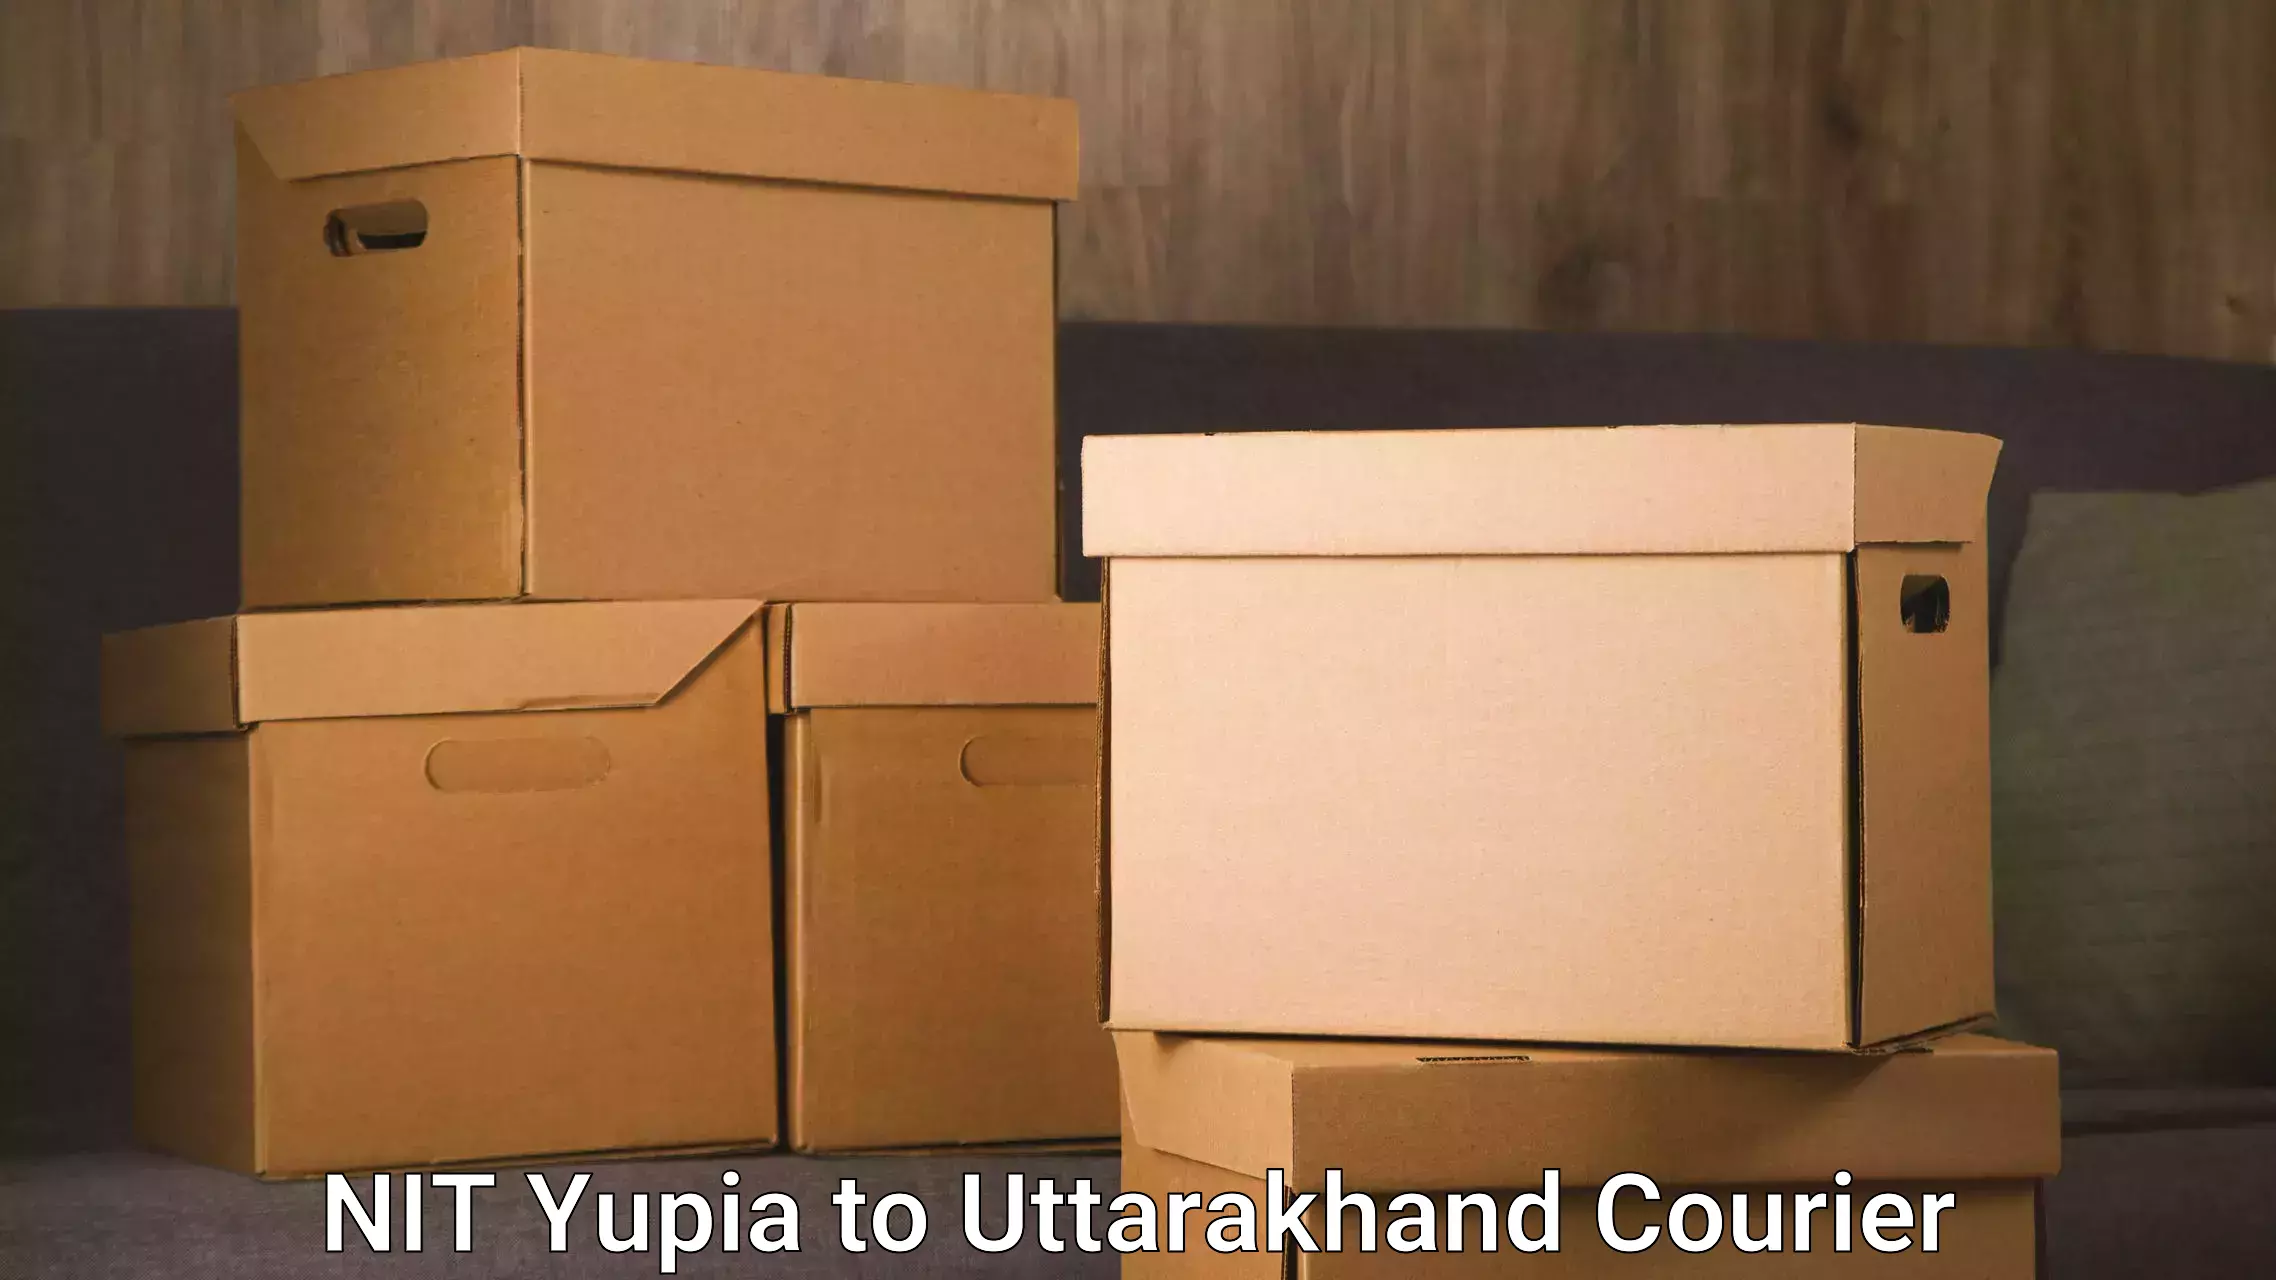 24/7 courier service NIT Yupia to Roorkee